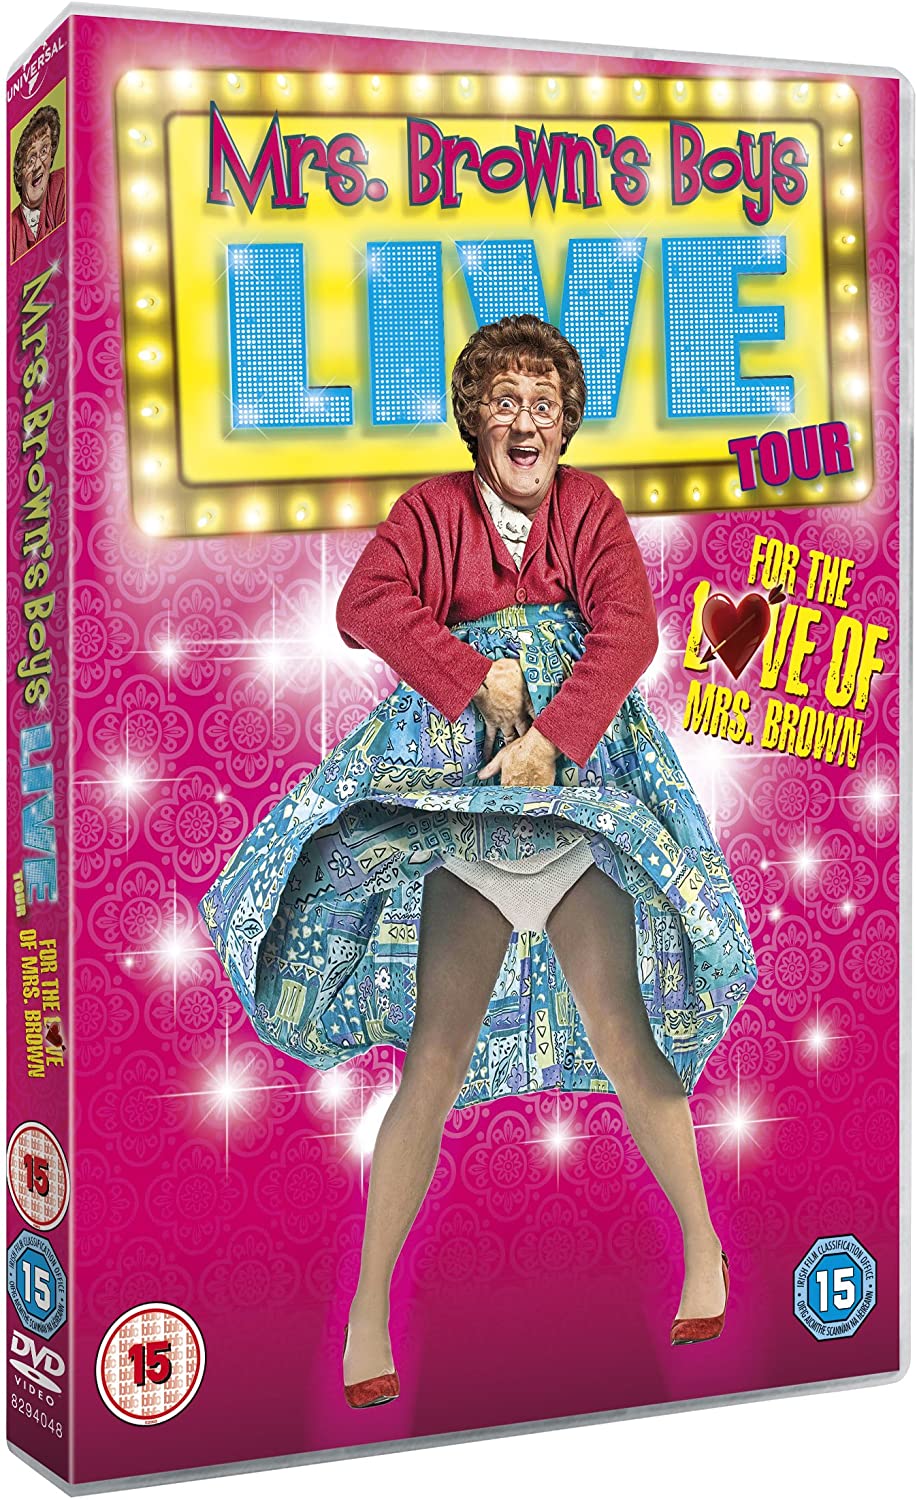 Mrs Brown's Boys Live Tour - For the Love of Mrs Brown [2013] - Sitcom [DVD]